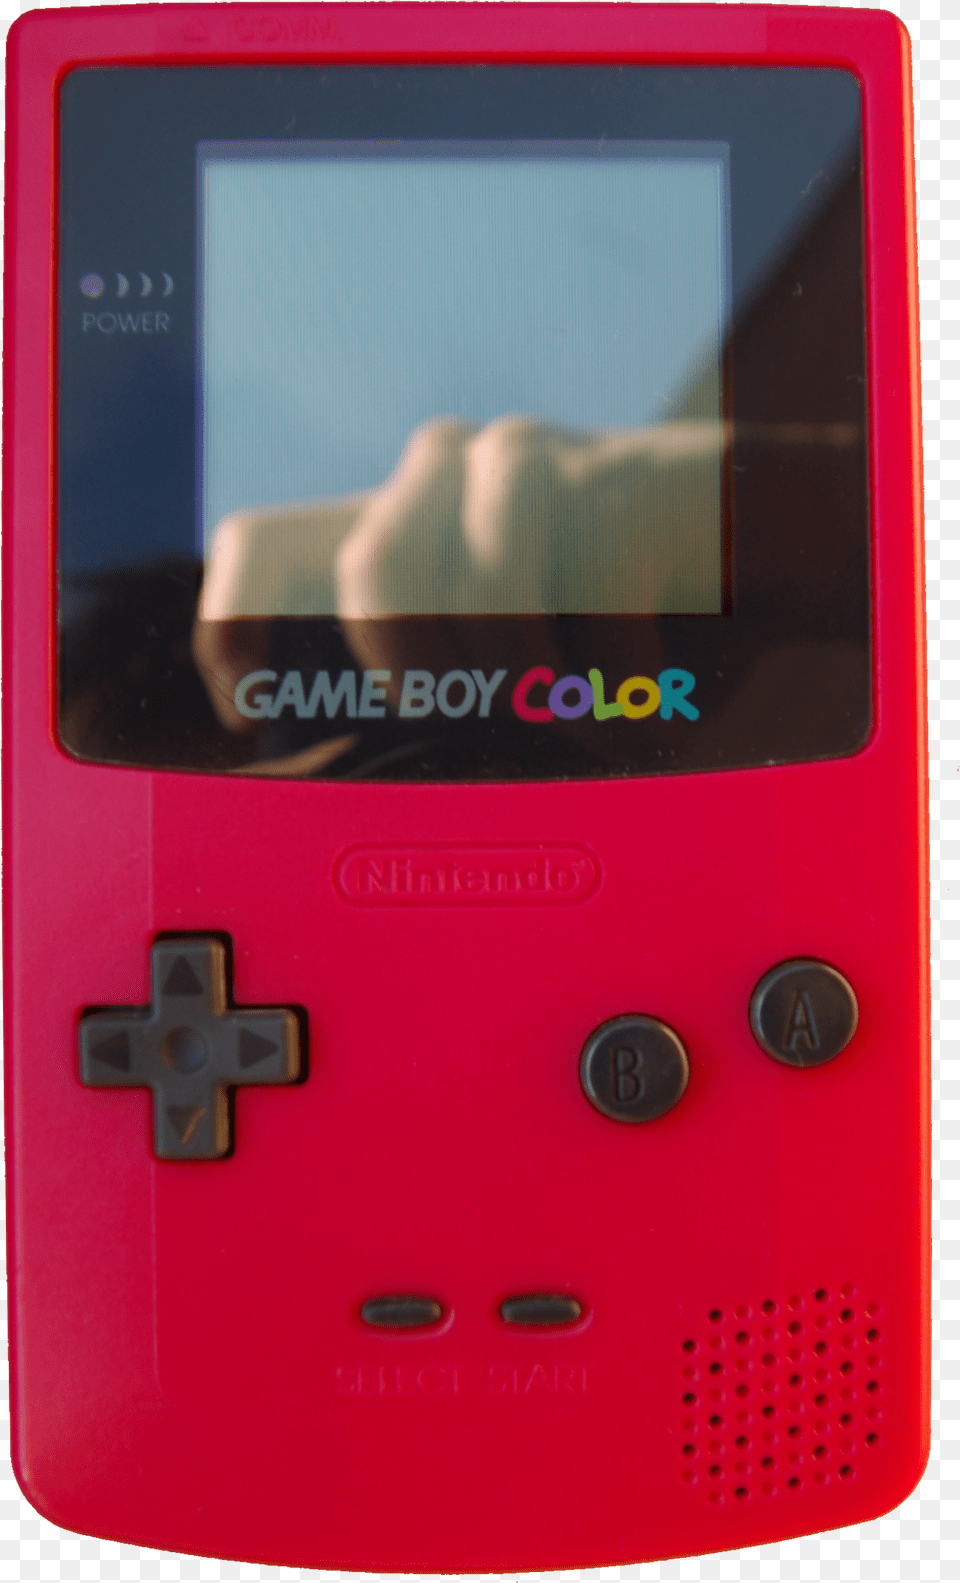 Gameboy Color, Electronics, Mobile Phone, Phone, Electrical Device Png Image